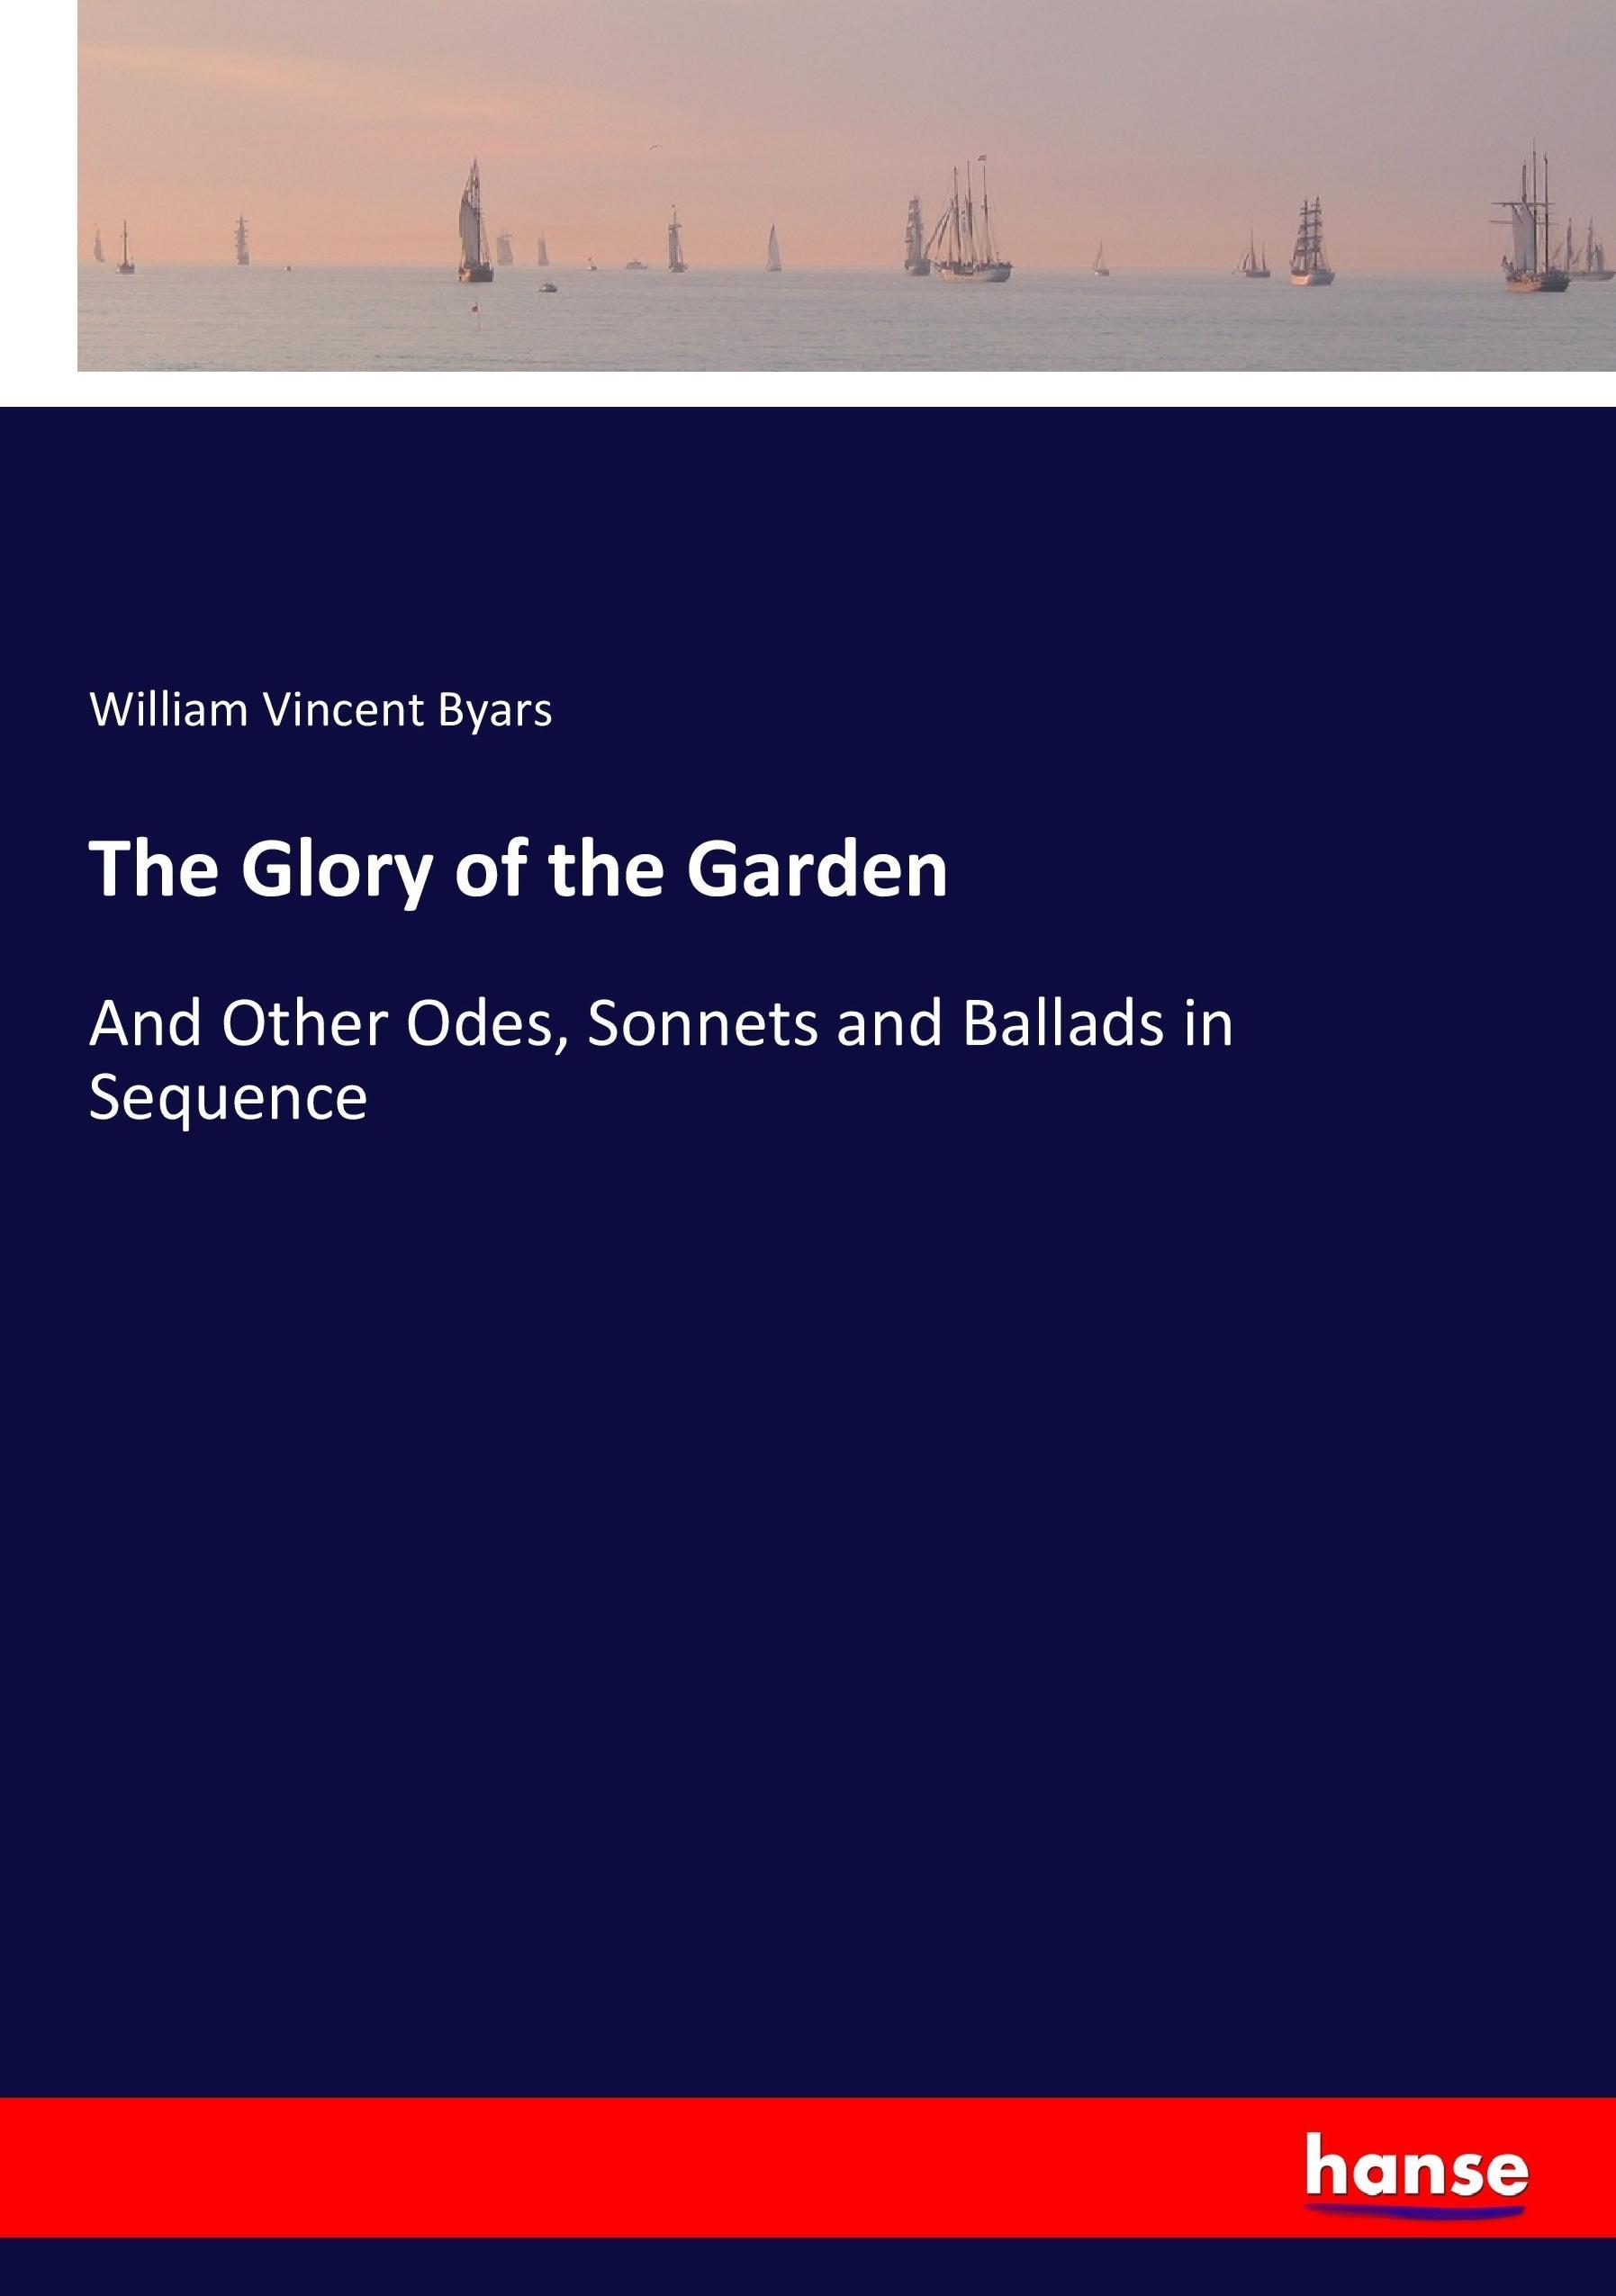 The Glory of the Garden | And Other Odes, Sonnets and Ballads in Sequence | William Vincent Byars | Taschenbuch | Paperback | 196 S. | Englisch | 2017 | hansebooks | EAN 9783744784115 - Byars, William Vincent